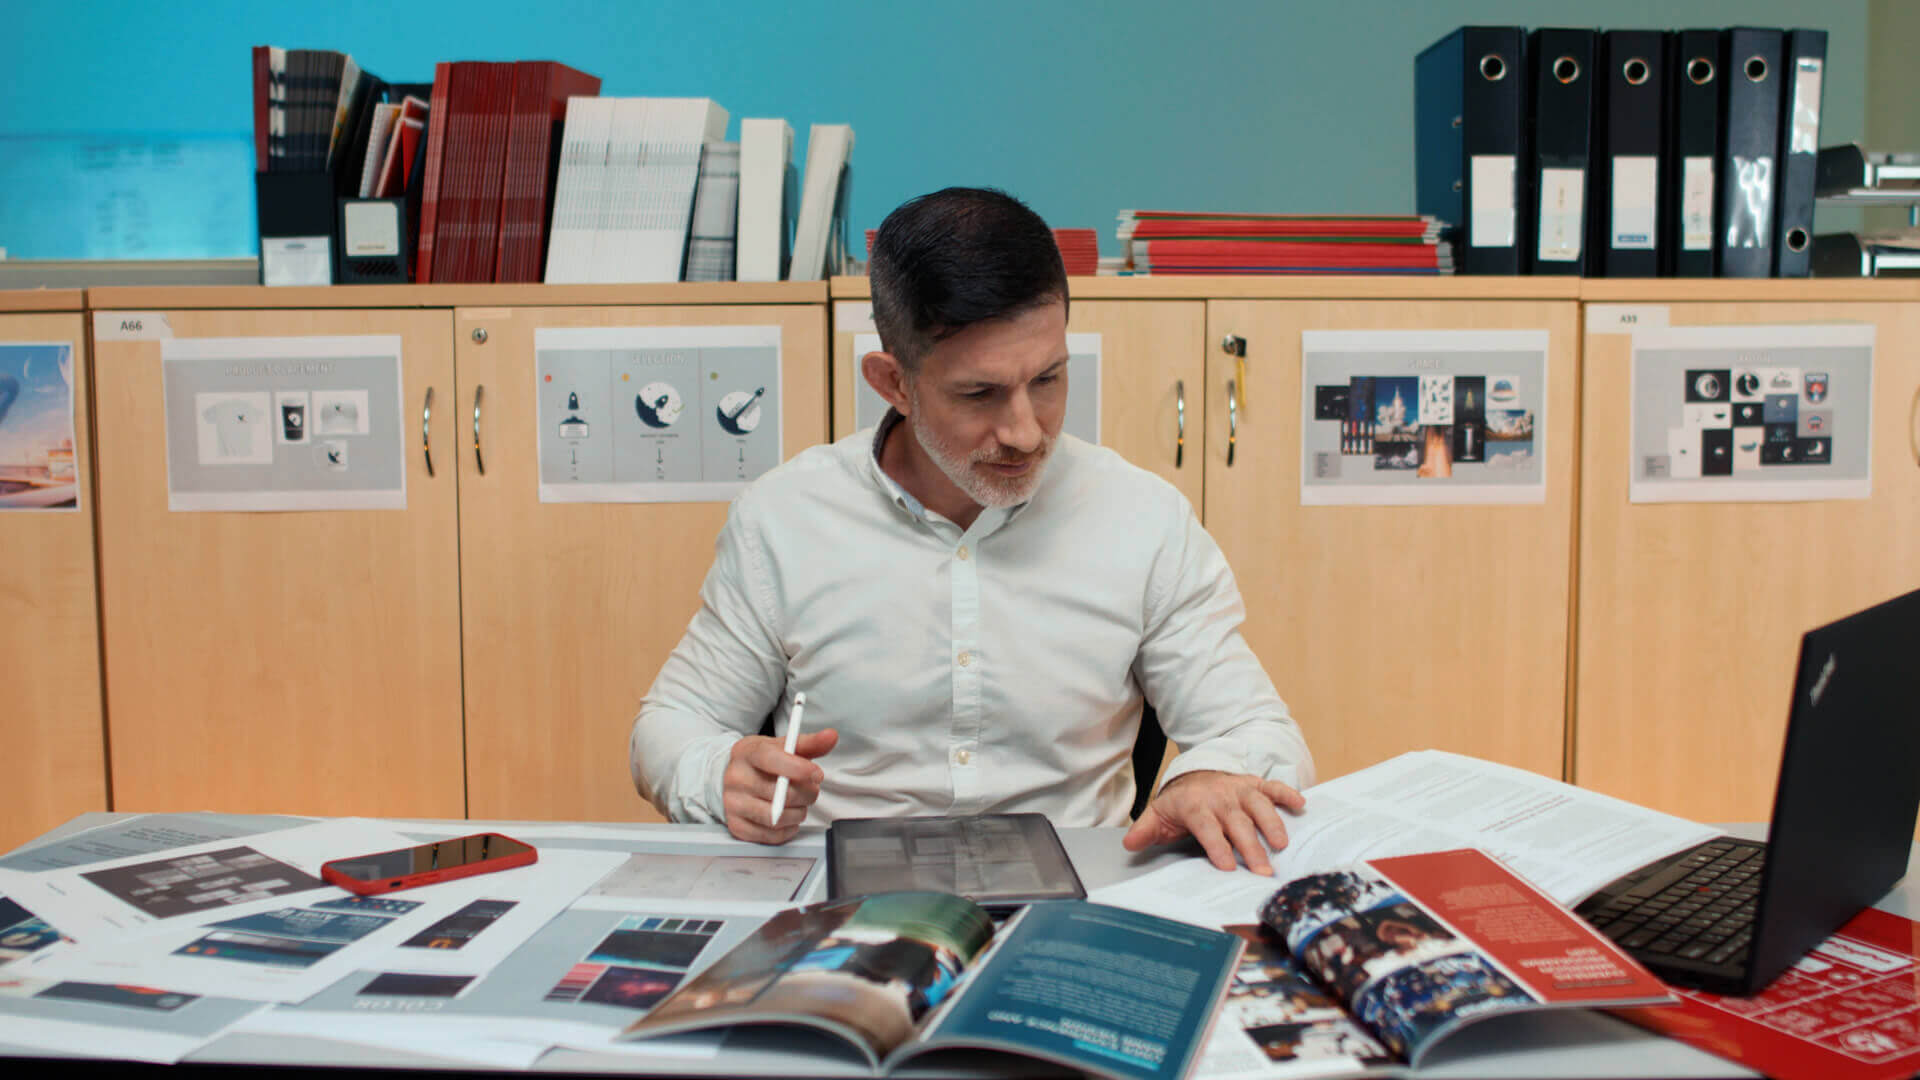 Michael Thompson sits at desk holding a stylus while looking at various magazines